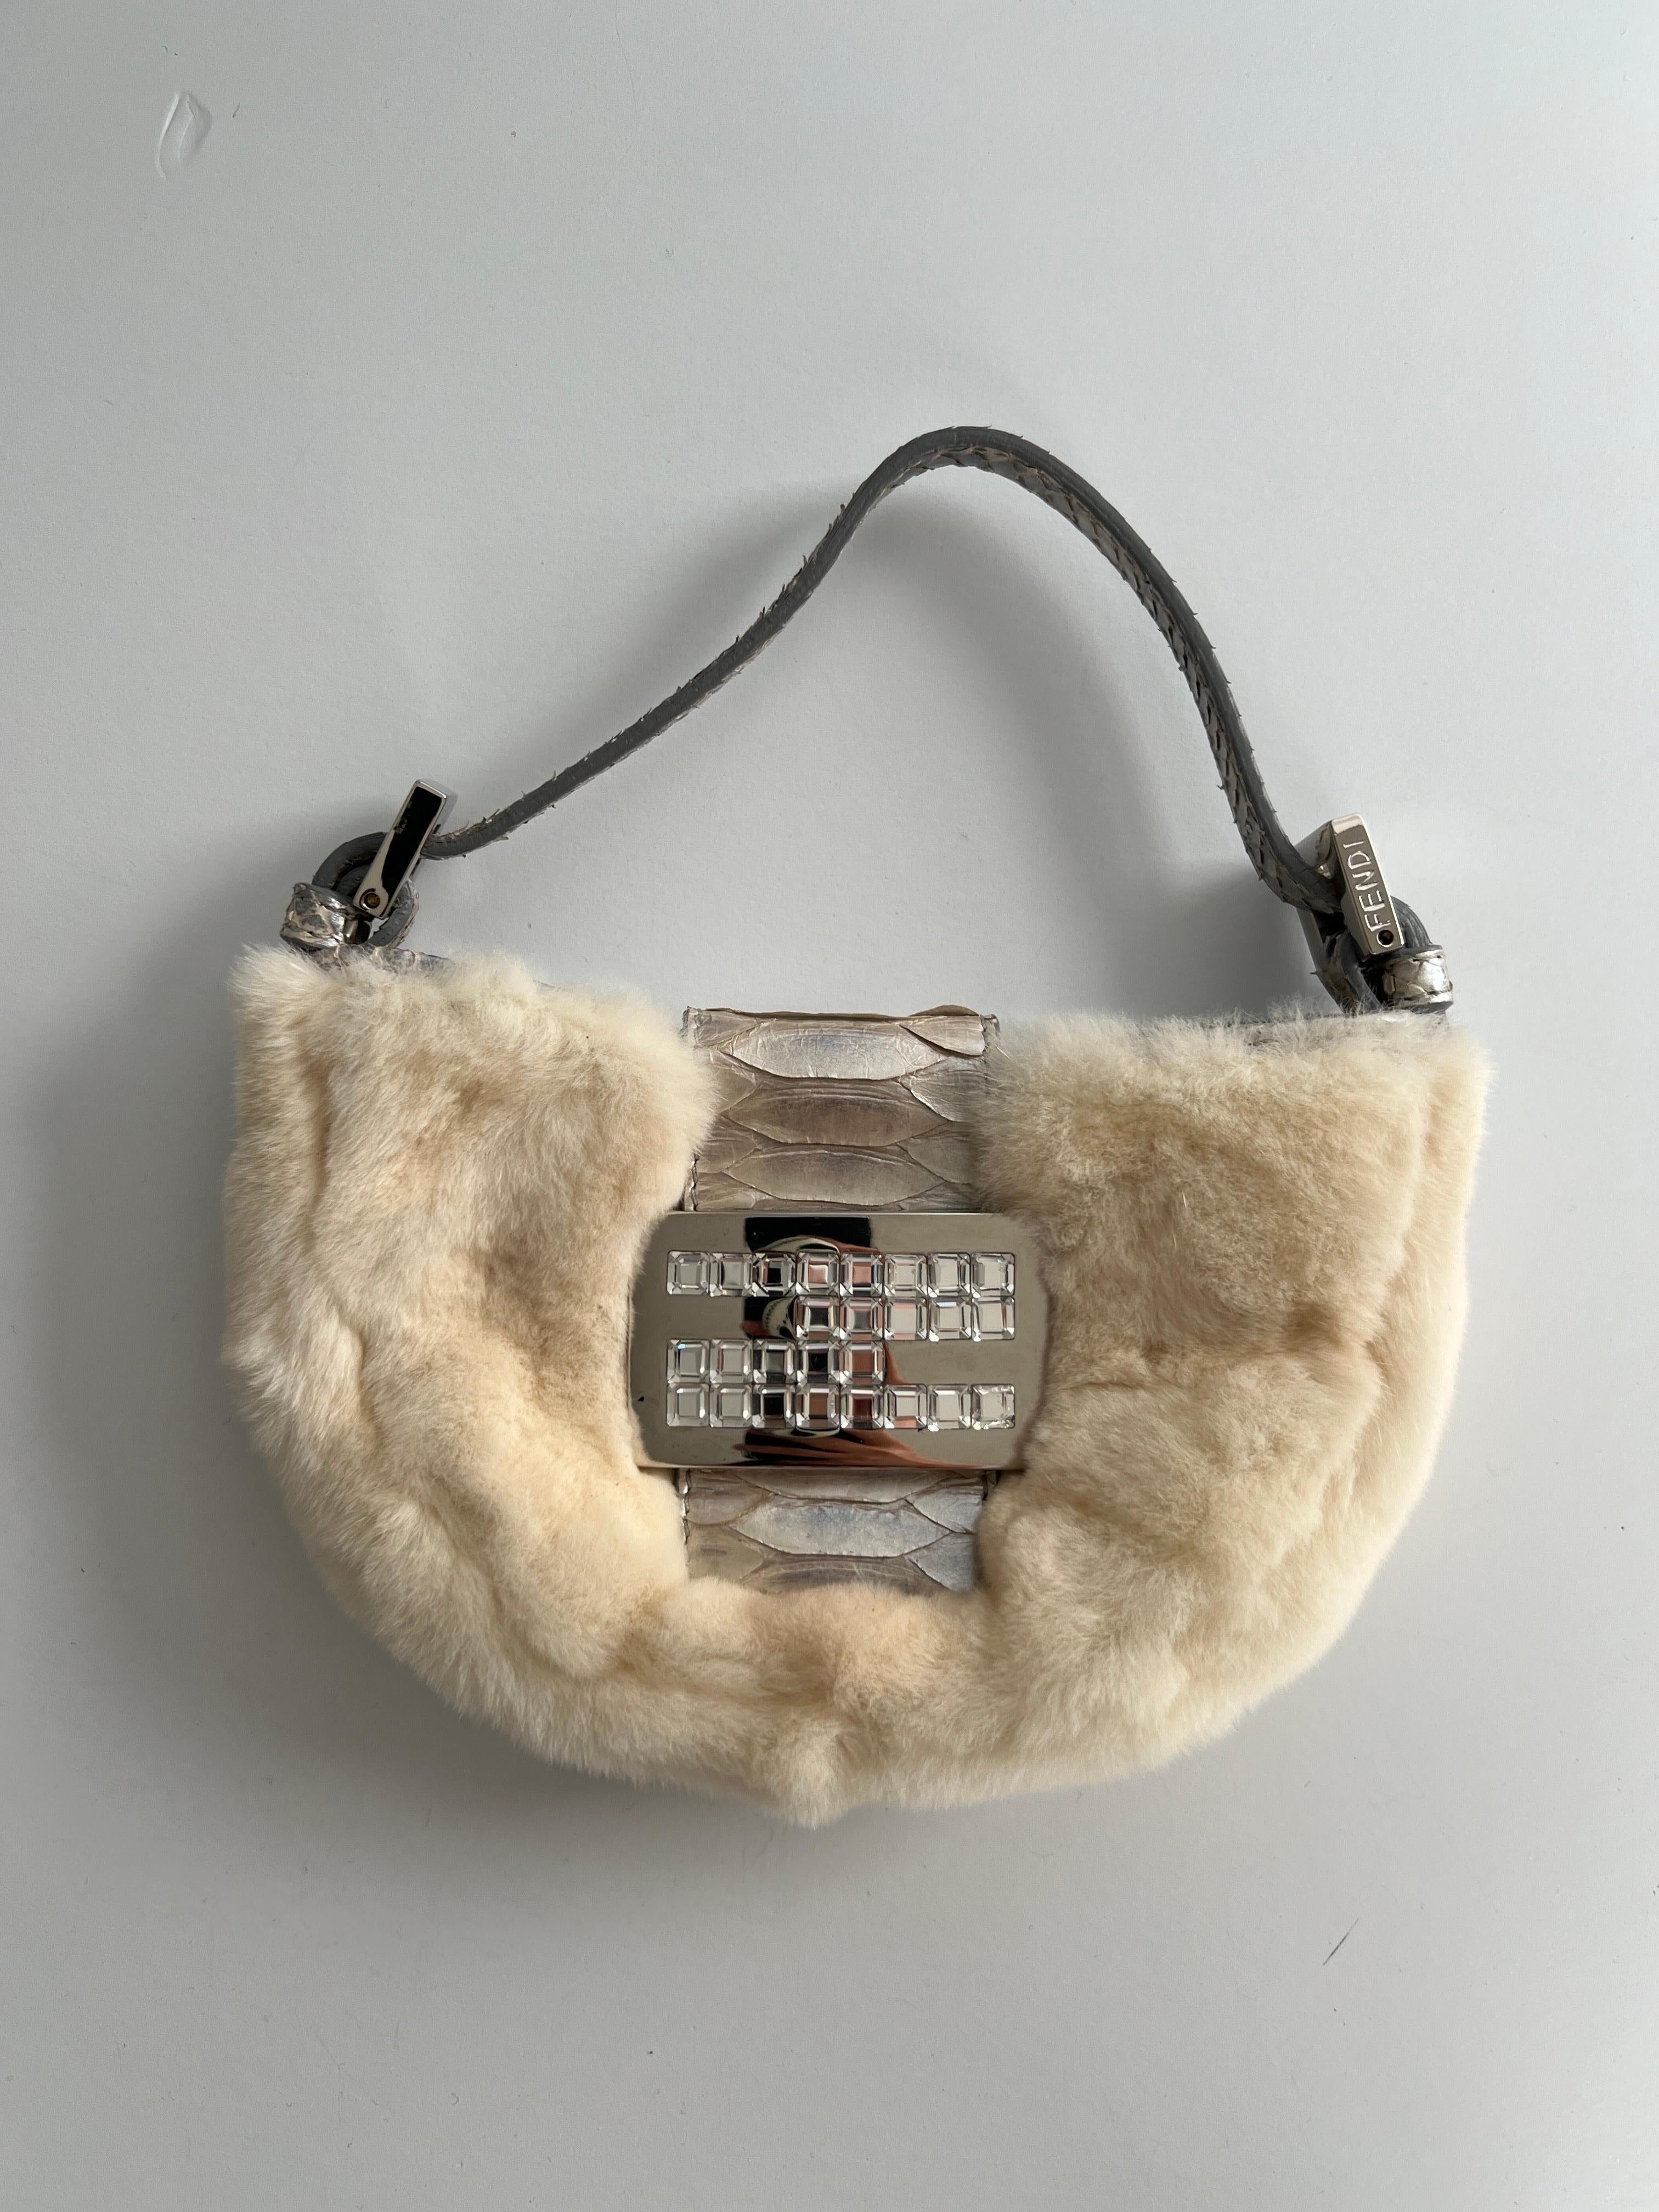 Rare Fendi Chinchilla fur croissant bag
Very good condition
No noticeable stains or flaws
Rhinestone buckle, no rhinestone missing
Clean satin interior
Natural white with a little light caramel color. It's original color, no dirt, no dye.
Silver